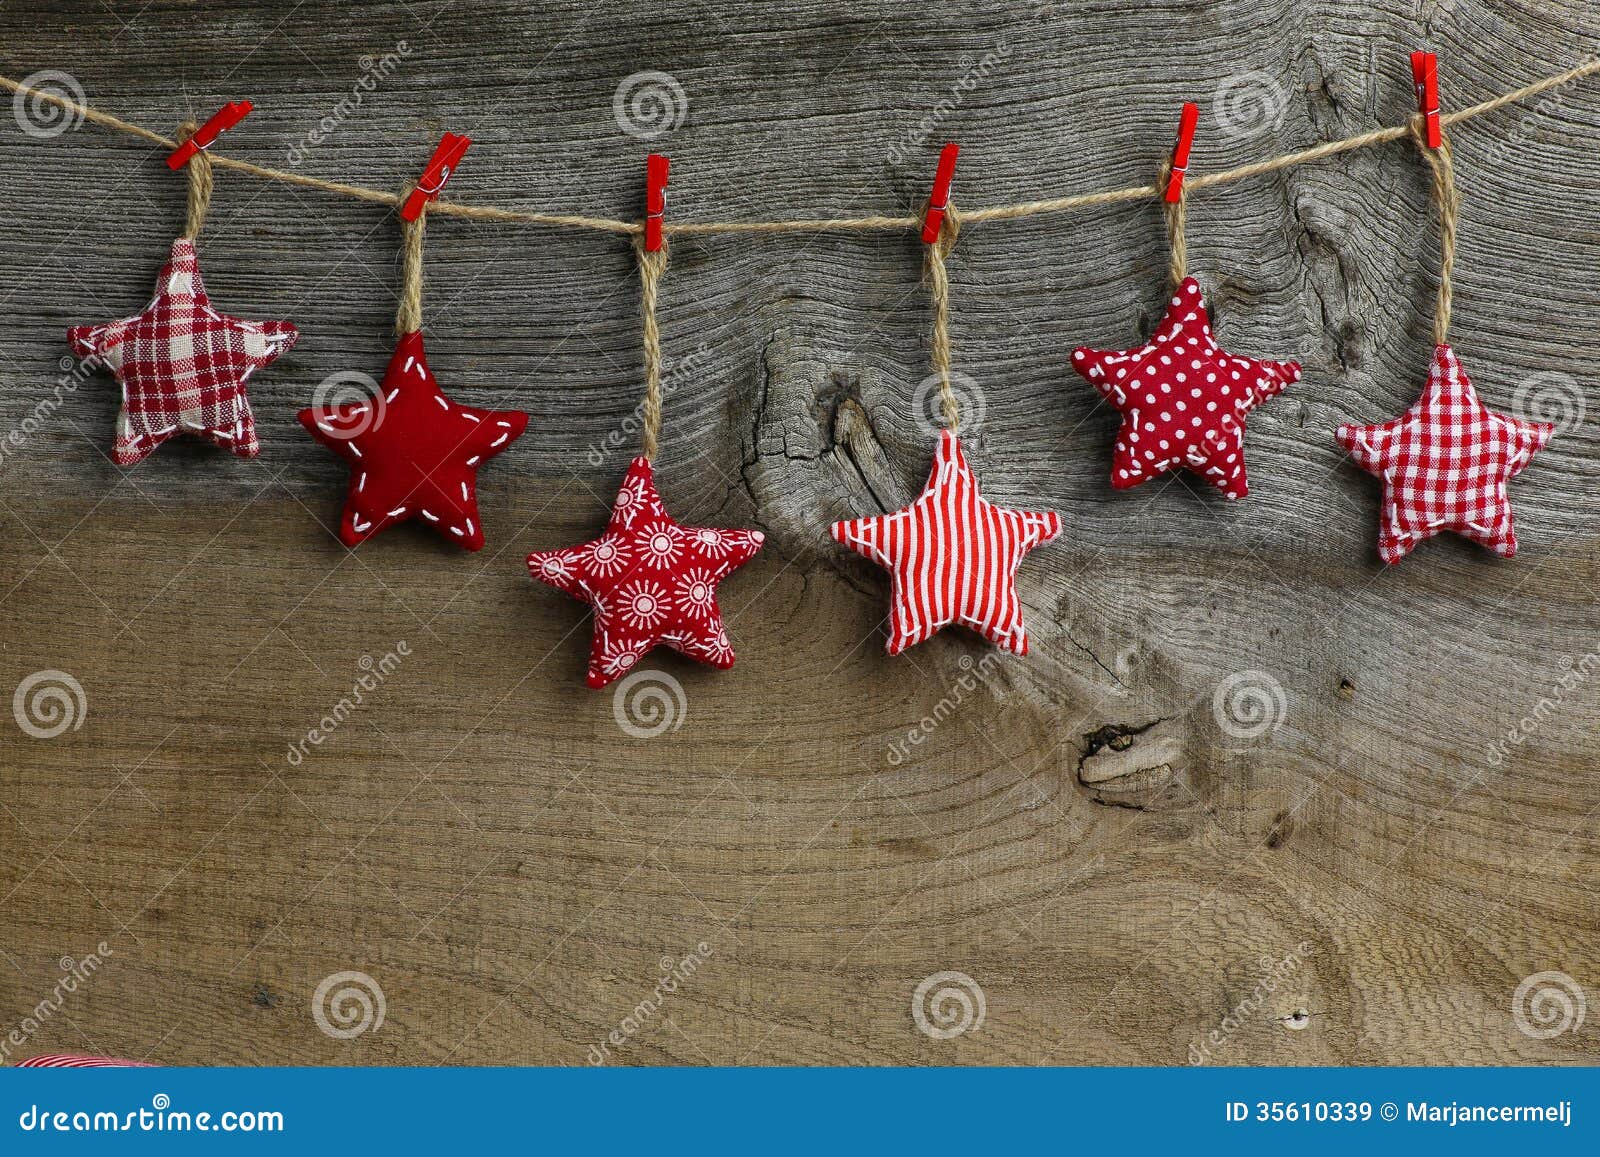 Wooden Christmas Ornaments Patterns Free Plans DIY Free Download rasp 